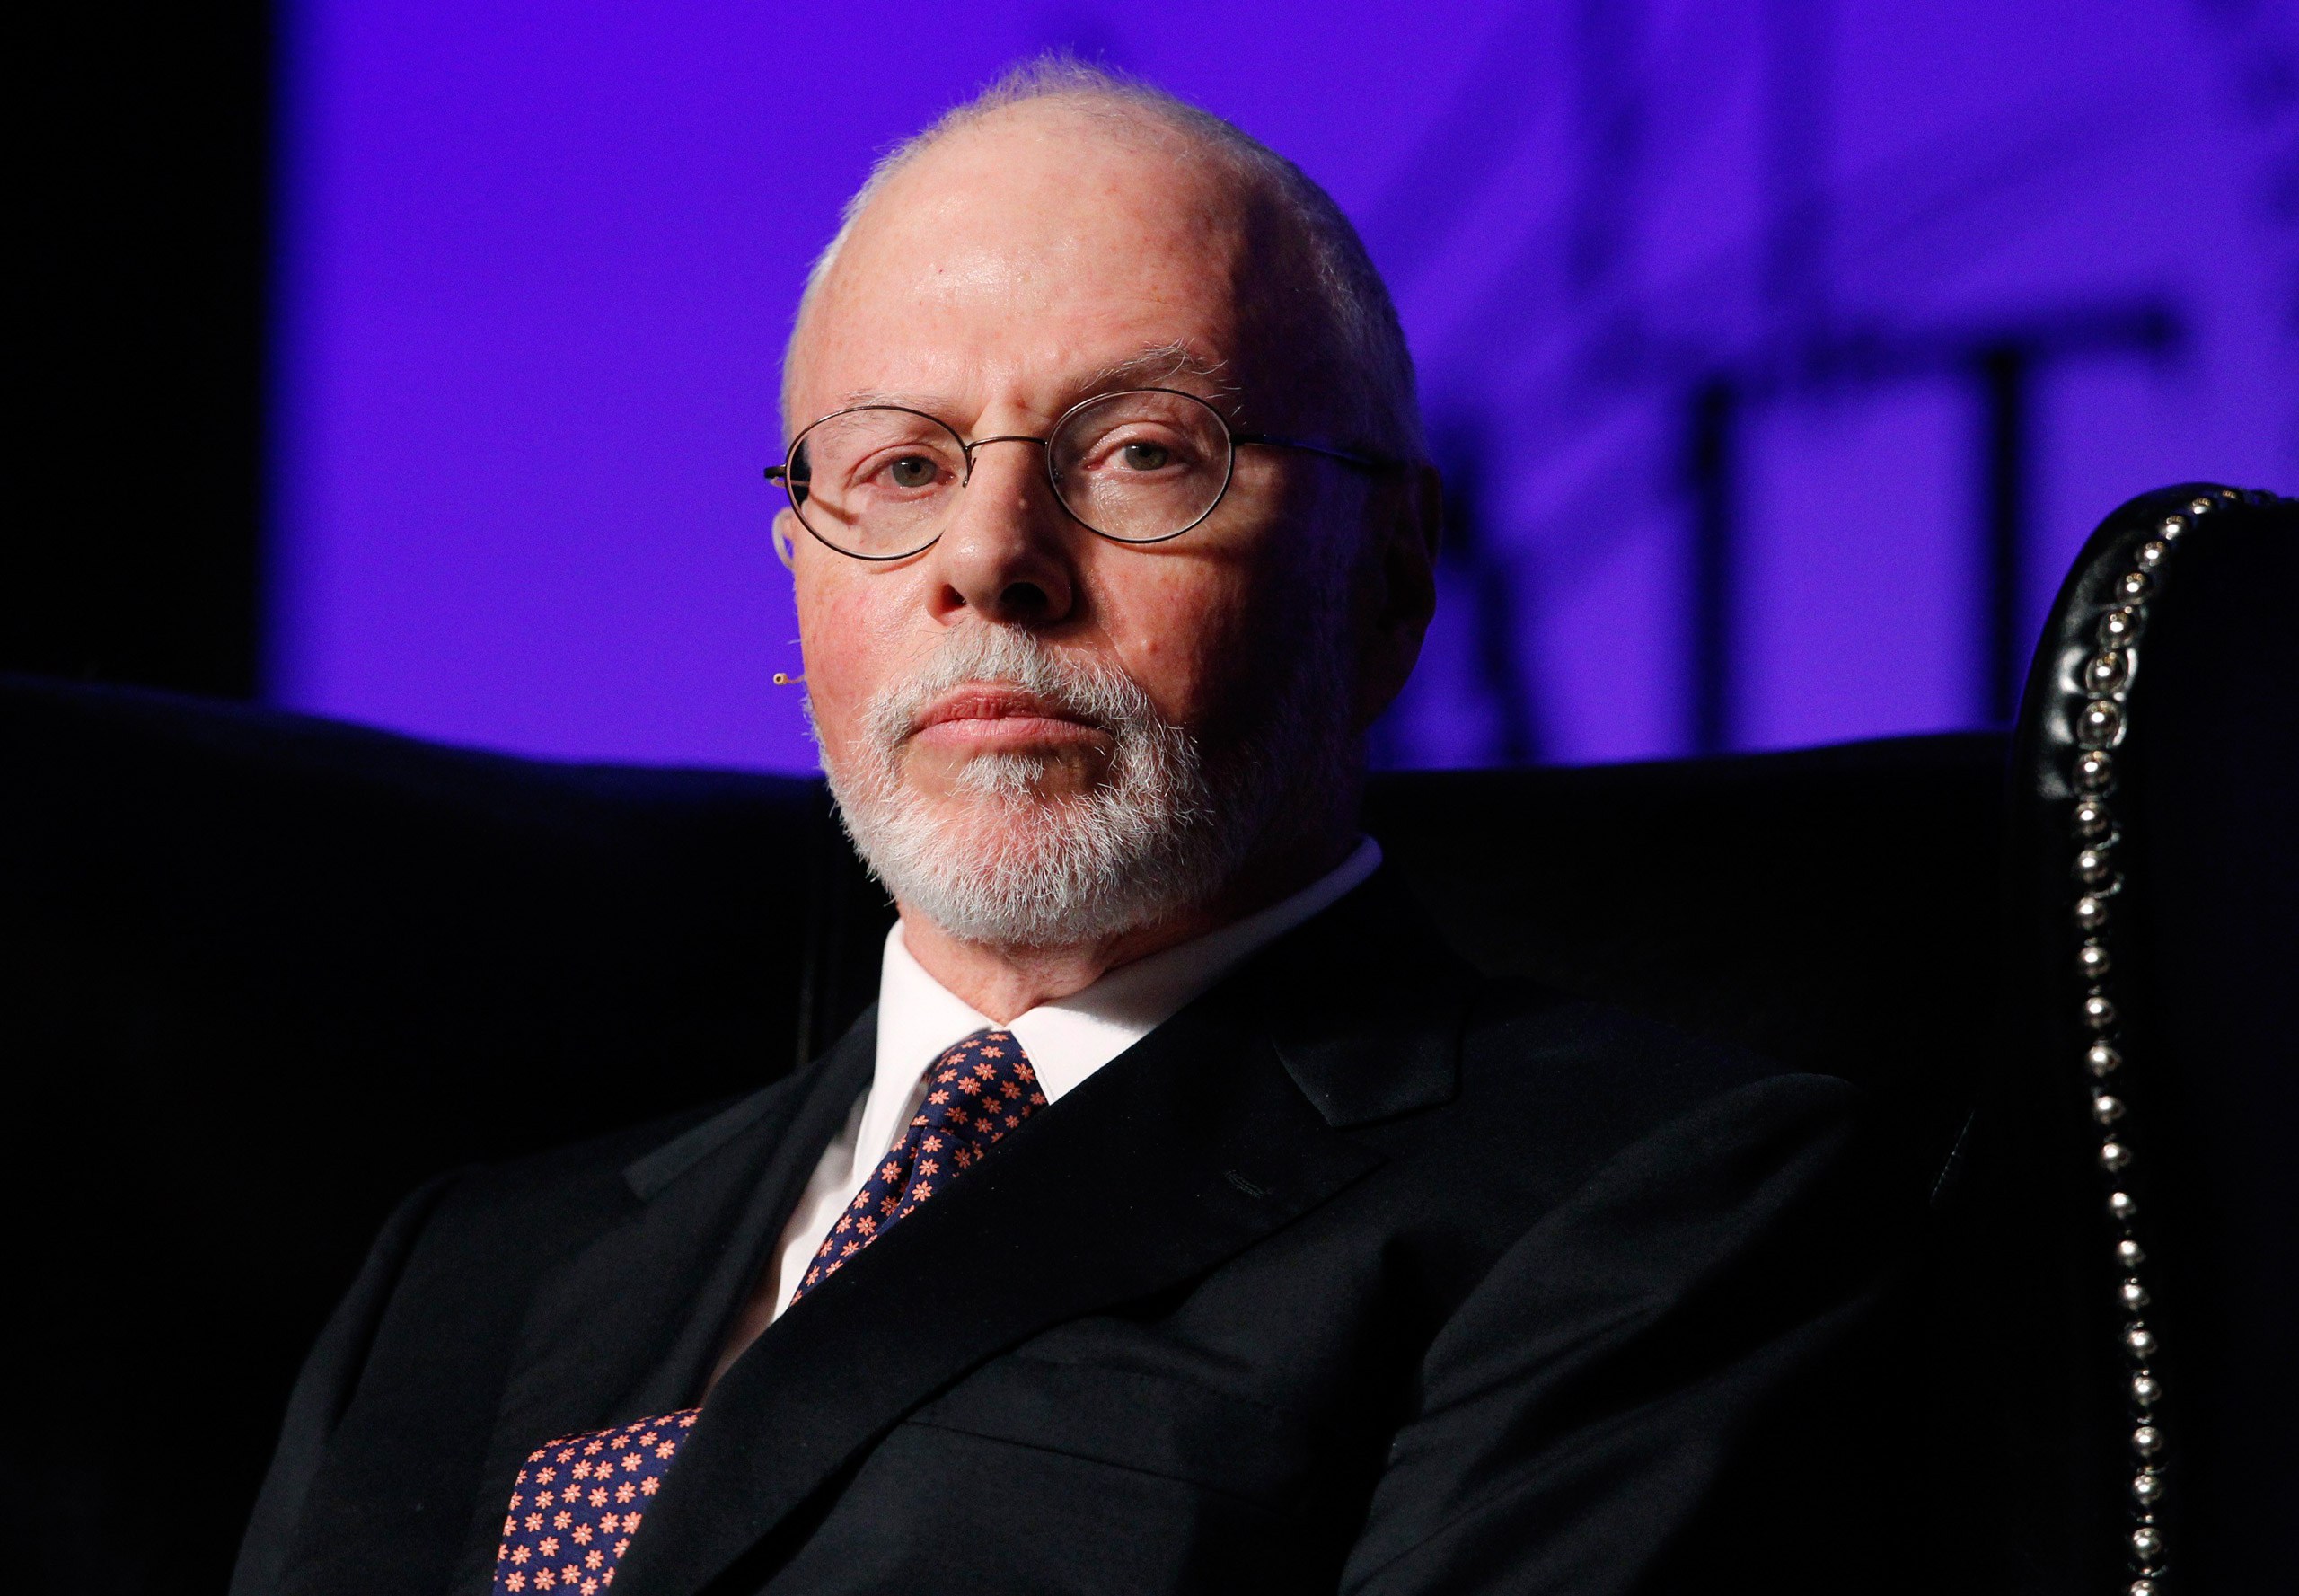 Paul Singer, founder, CEO, and co-chief investment officer for Elliott Management Corporation, attends the Skybridge Alternatives (SALT) Conference in Las Vegas, Nevada in this May 9, 2012, file photo. Billionaire New York investor Paul Singer sent a letter to dozens of other donors on October 30, 2015, declaring his support for Rubio in a major blow to the struggling campaign of former Florida Governor Jeb Bush, the newspaper said.  REUTERS/Steve Marcus/Files